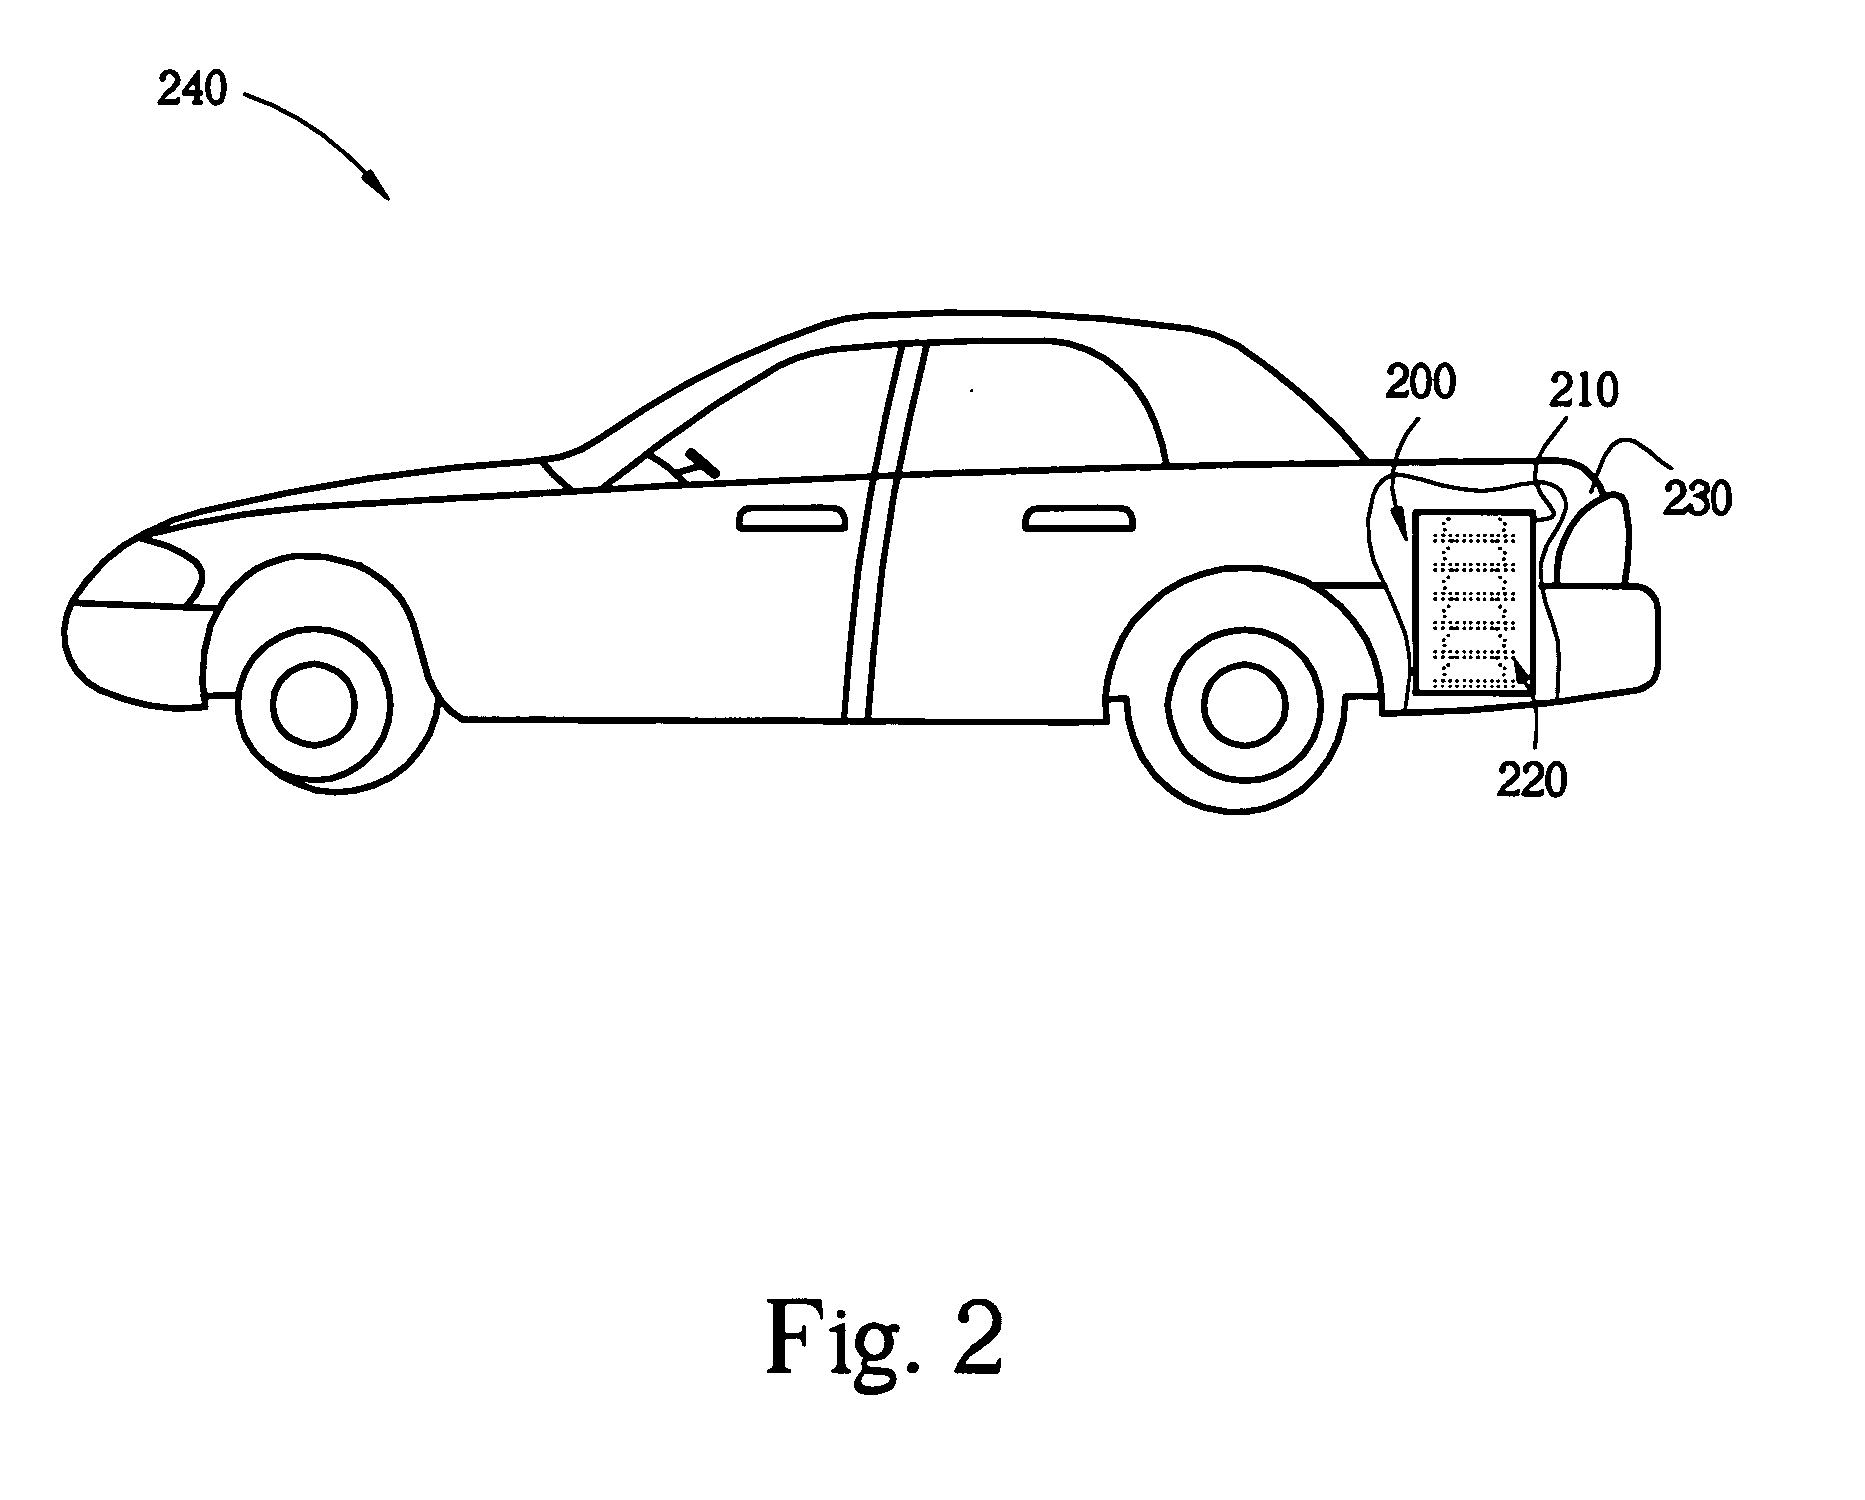 Safety cone placing device and method